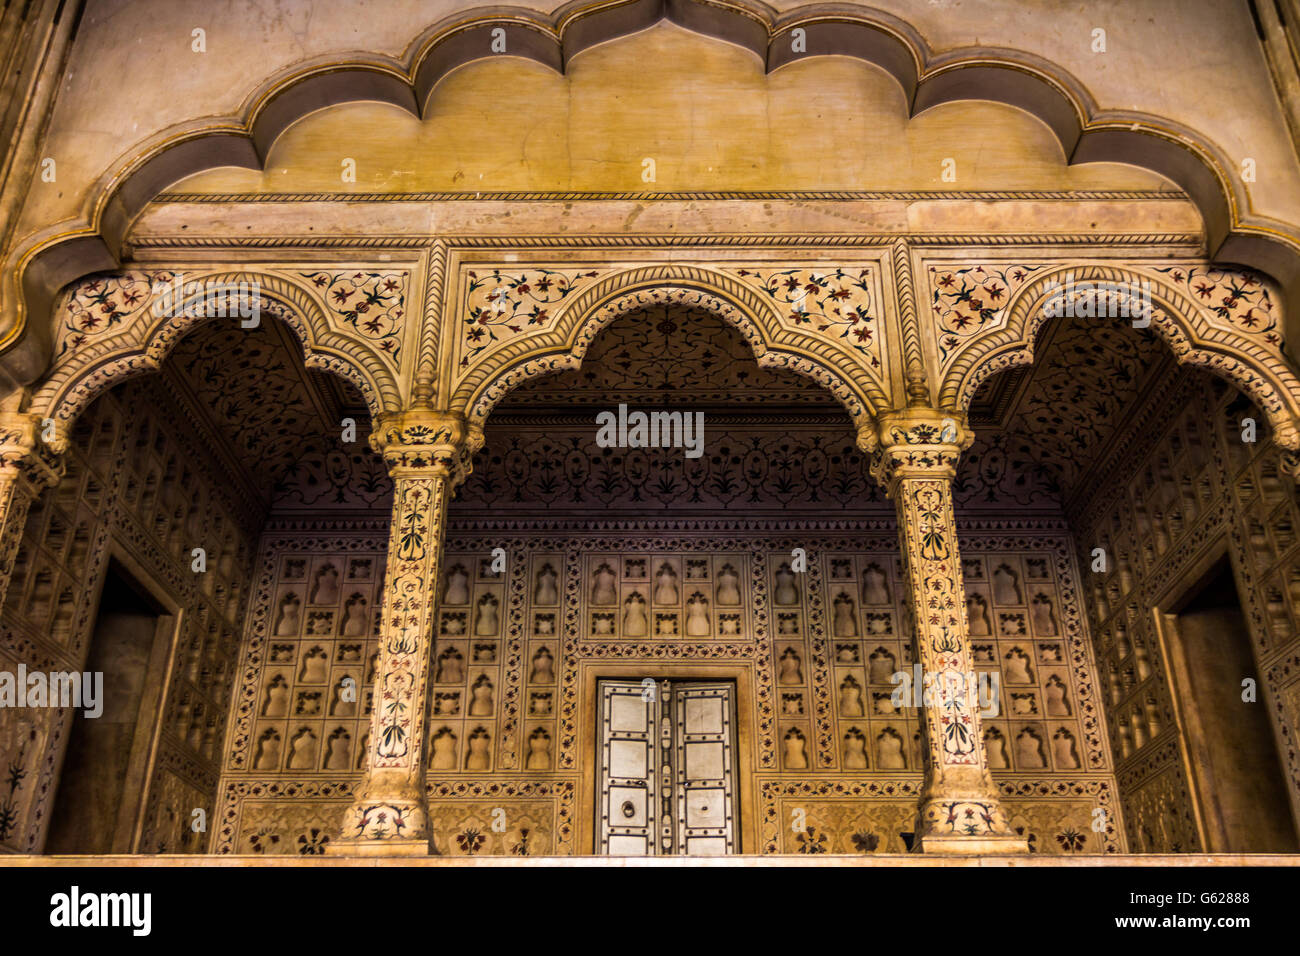 Walls inside Agra fort in India Stock Photo